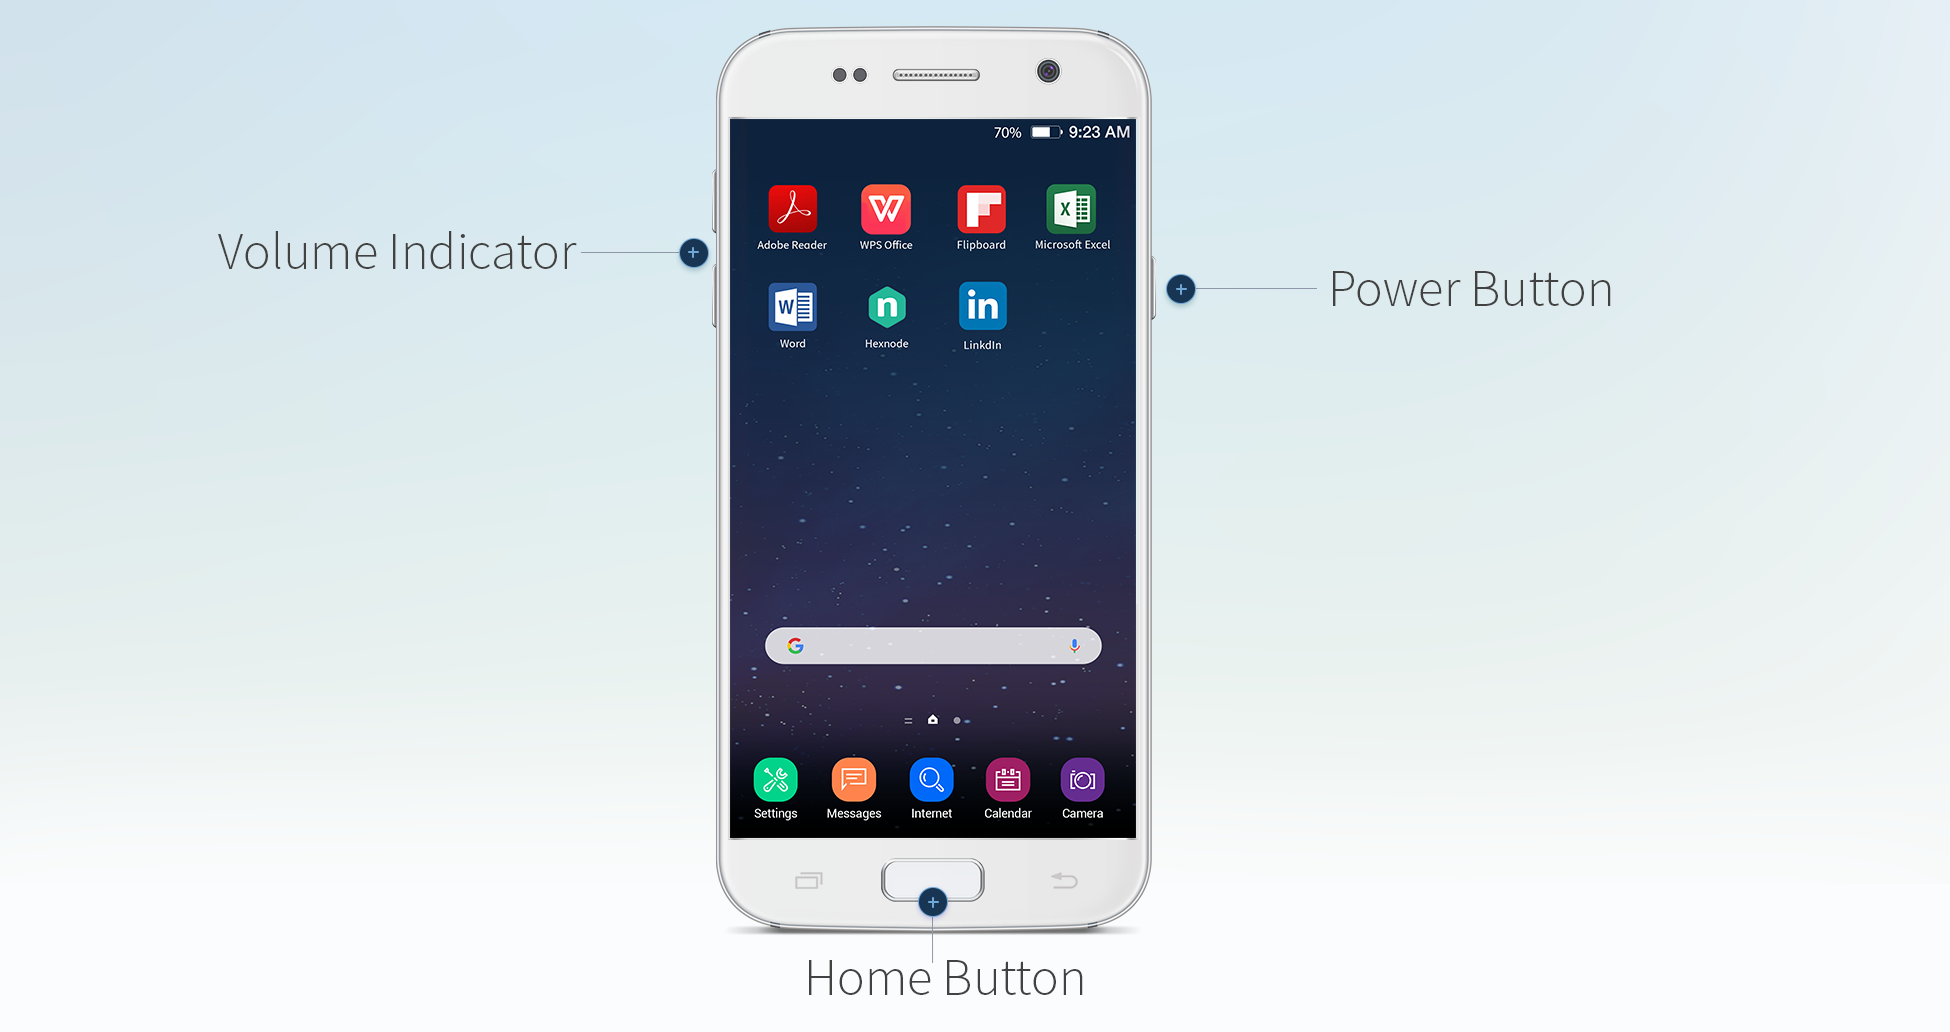 Hardware buttons on Android Devices